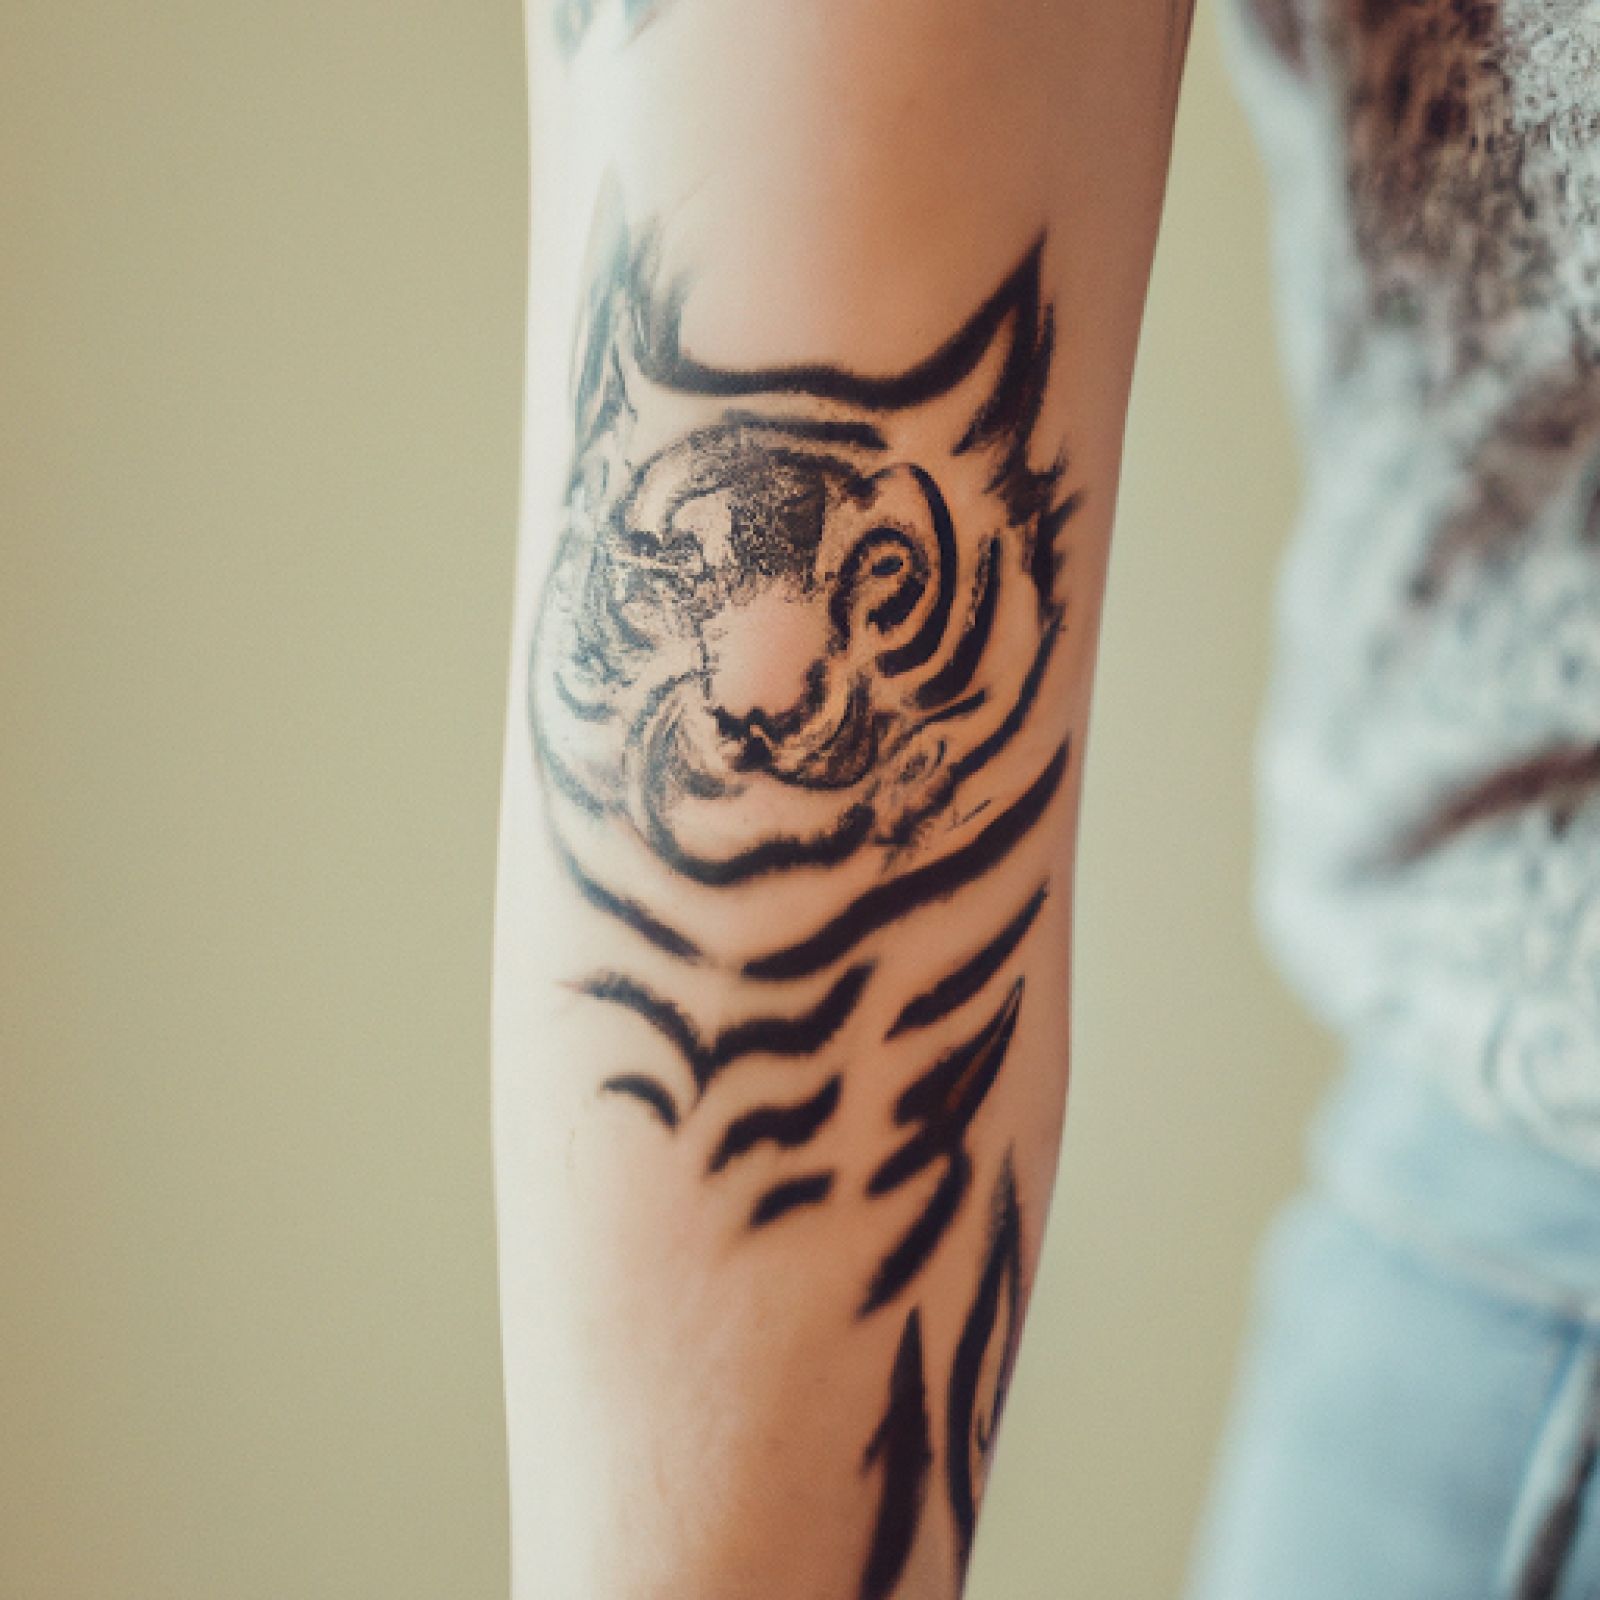 Tiger tattoo on arm for women